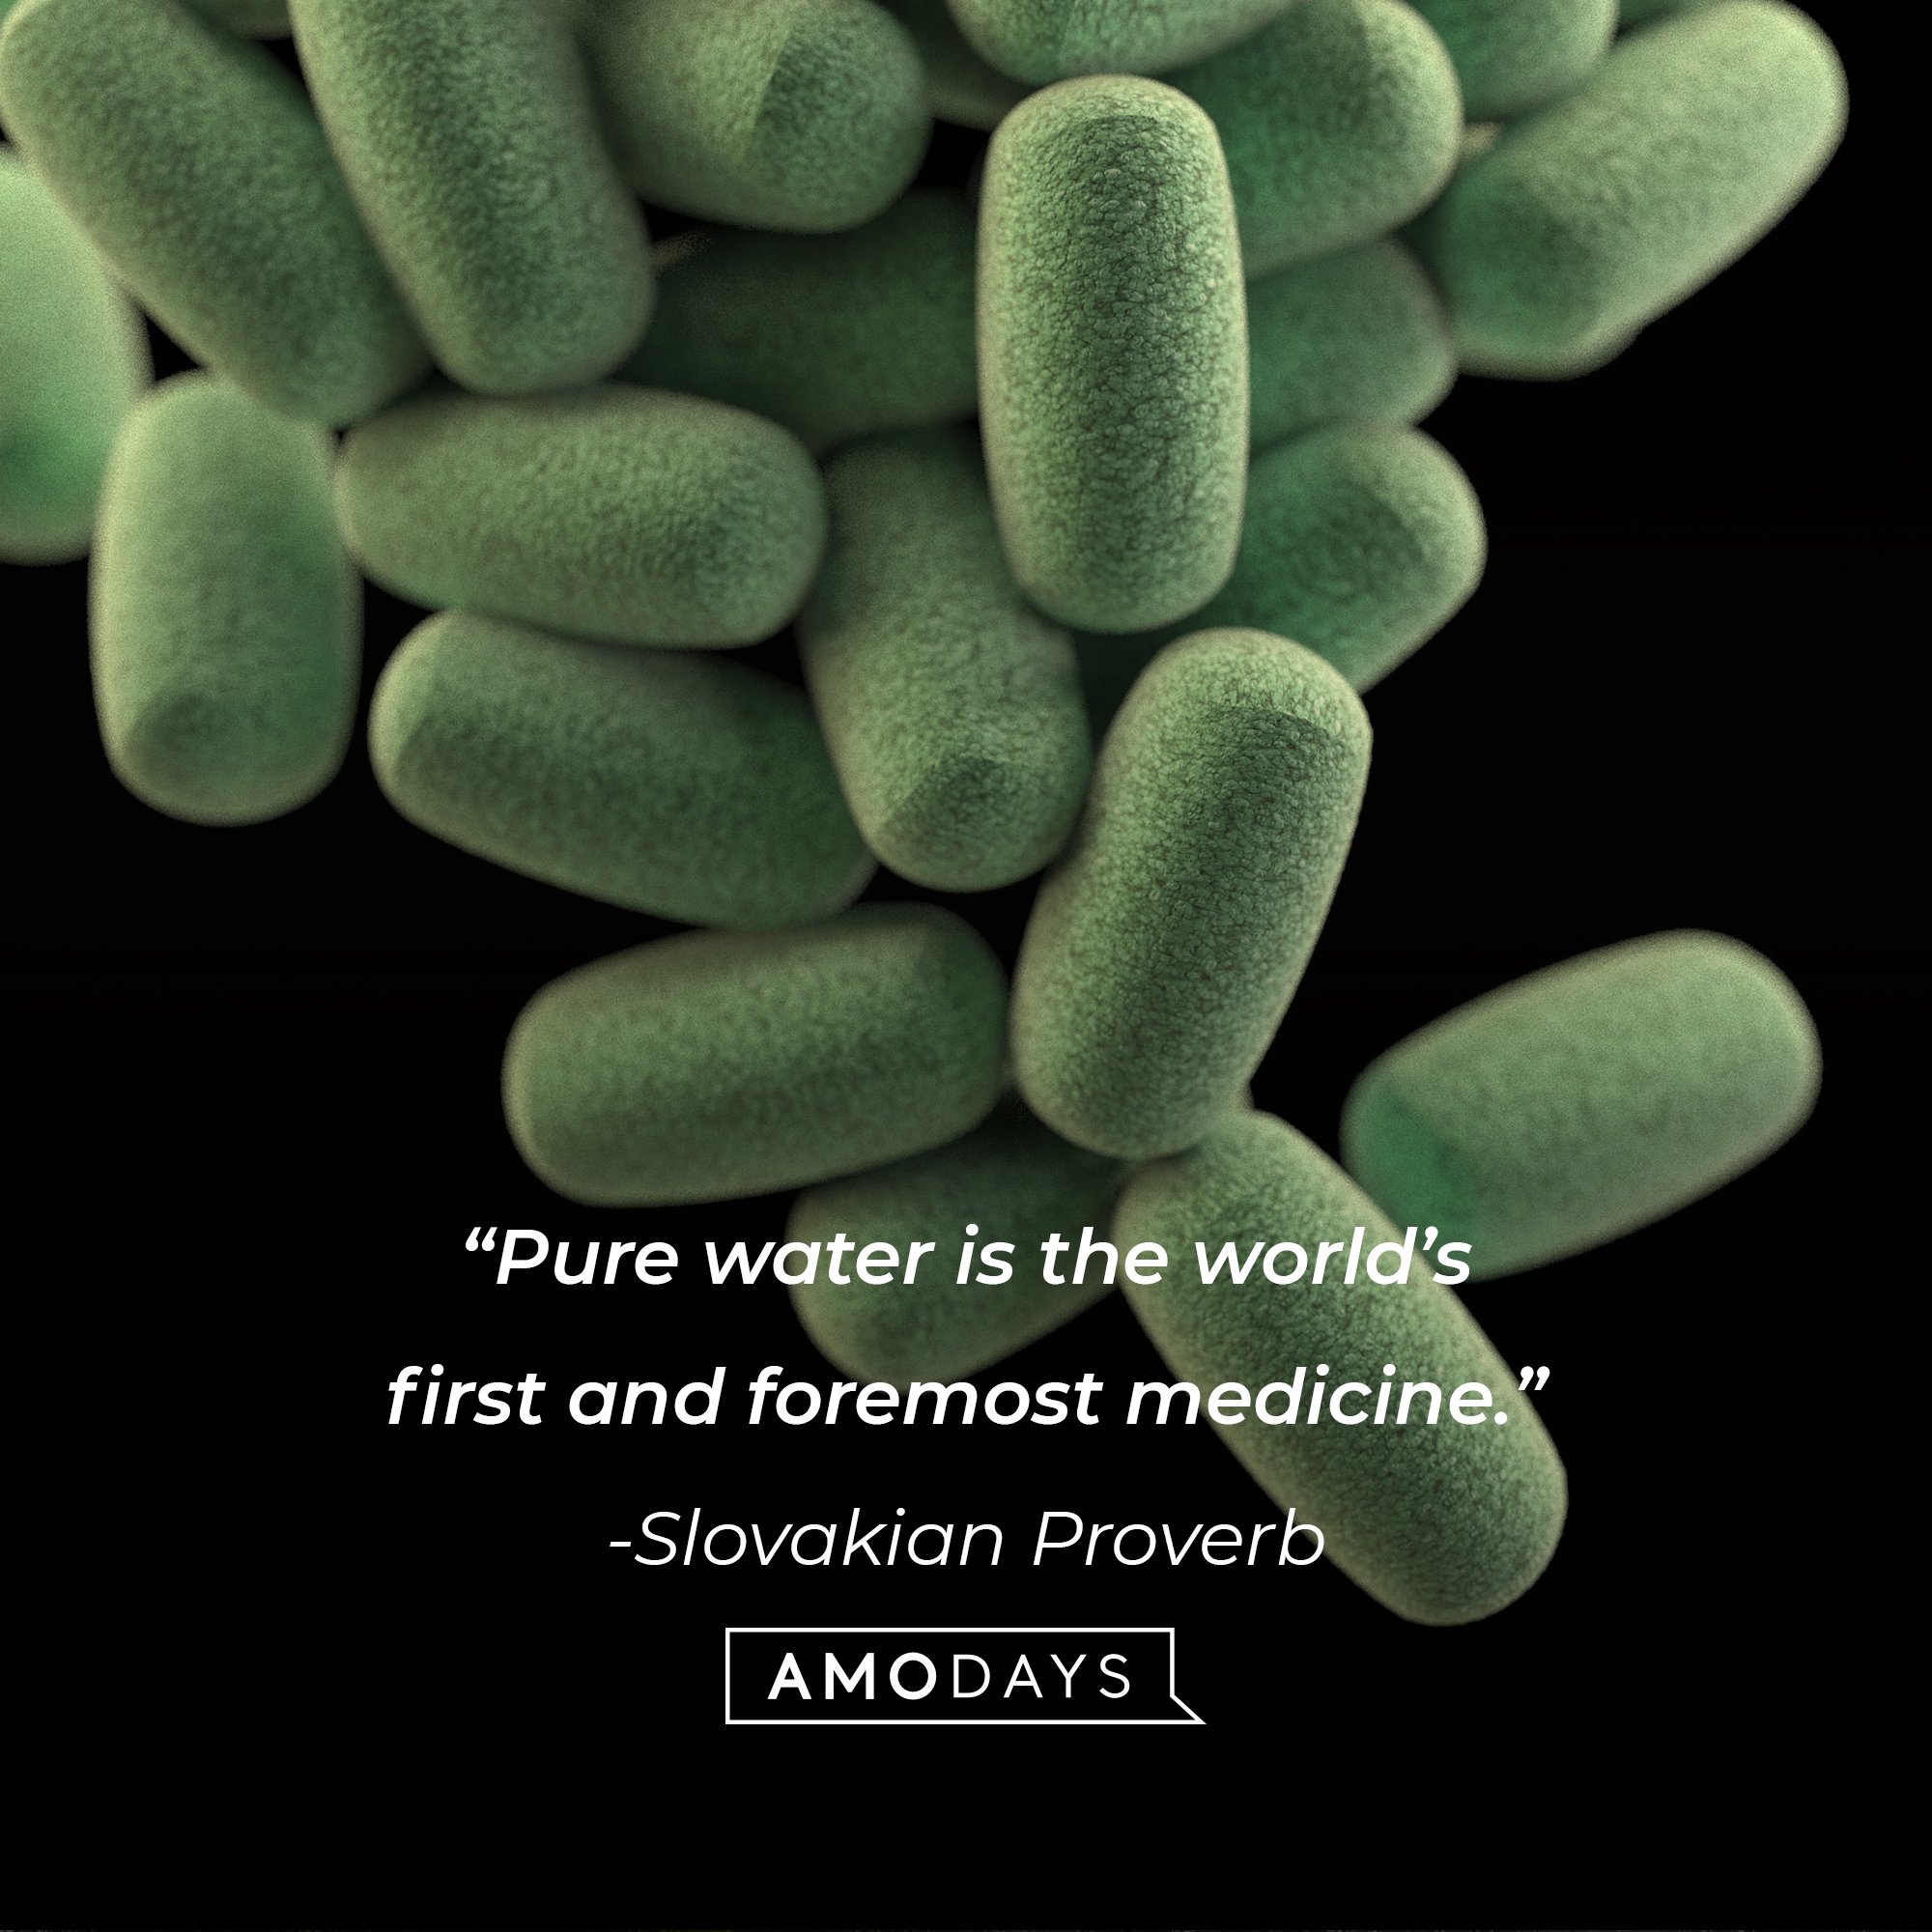 A Slovakian Proverb: “Pure water is the world’s first and foremost medicine.” | Image: AmoDays